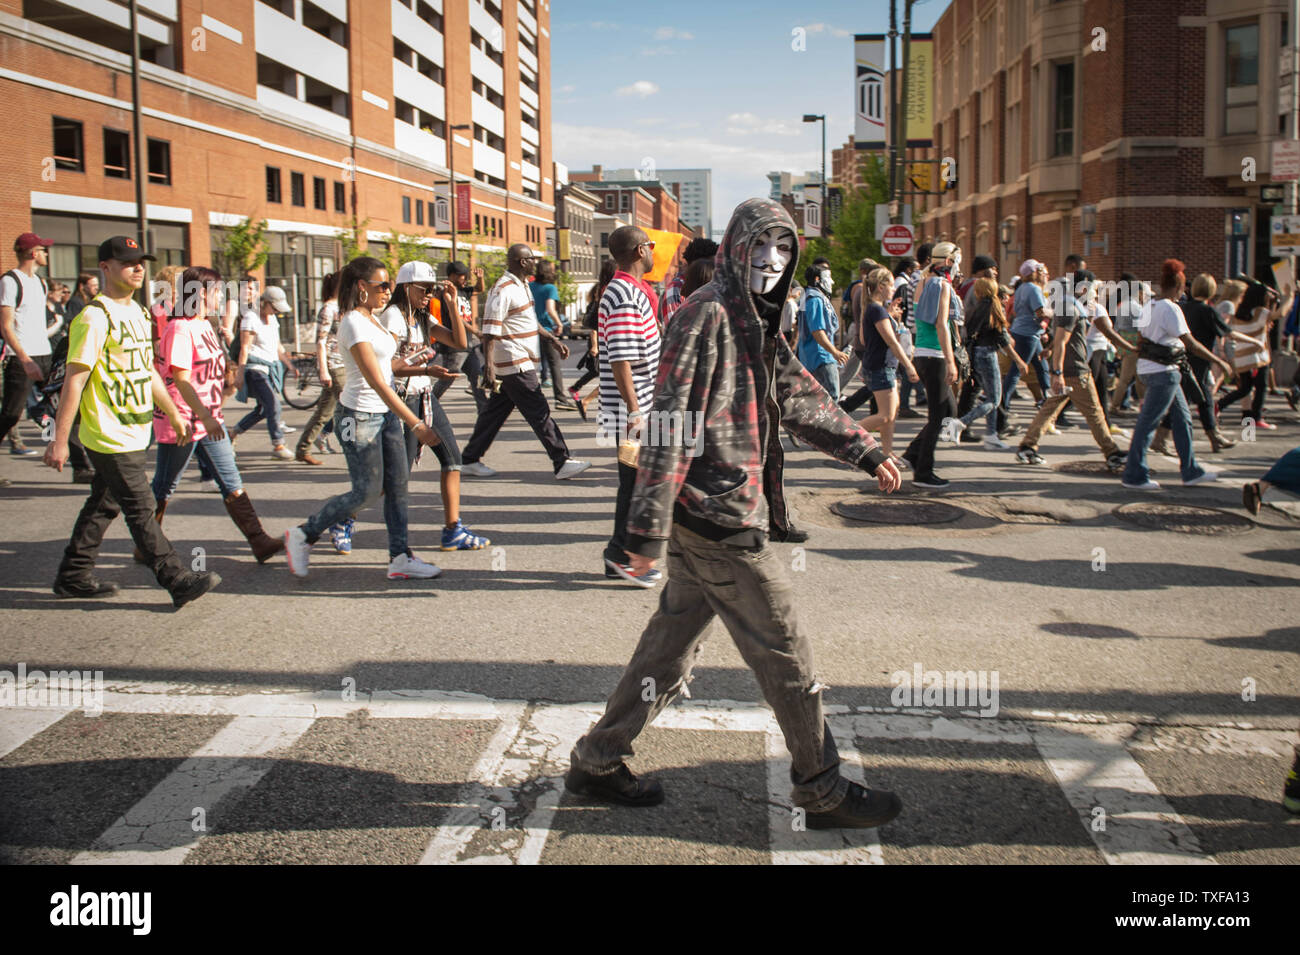 Baltimore residents march in a Massive National Rally of celebration in the streets of Baltimore, MD on May 2, 2015. City State's Attorney ruled the day before that Gray's death was a homicide and that criminal charges would be filed. Gray, 25 was arrested April 12 for possessing a switch blade knife near the Gilmore Housing project. Gray died a week later from a severe spinal cord injury received while in police custody. Photo Ken Cedeno/UPI Stock Photo